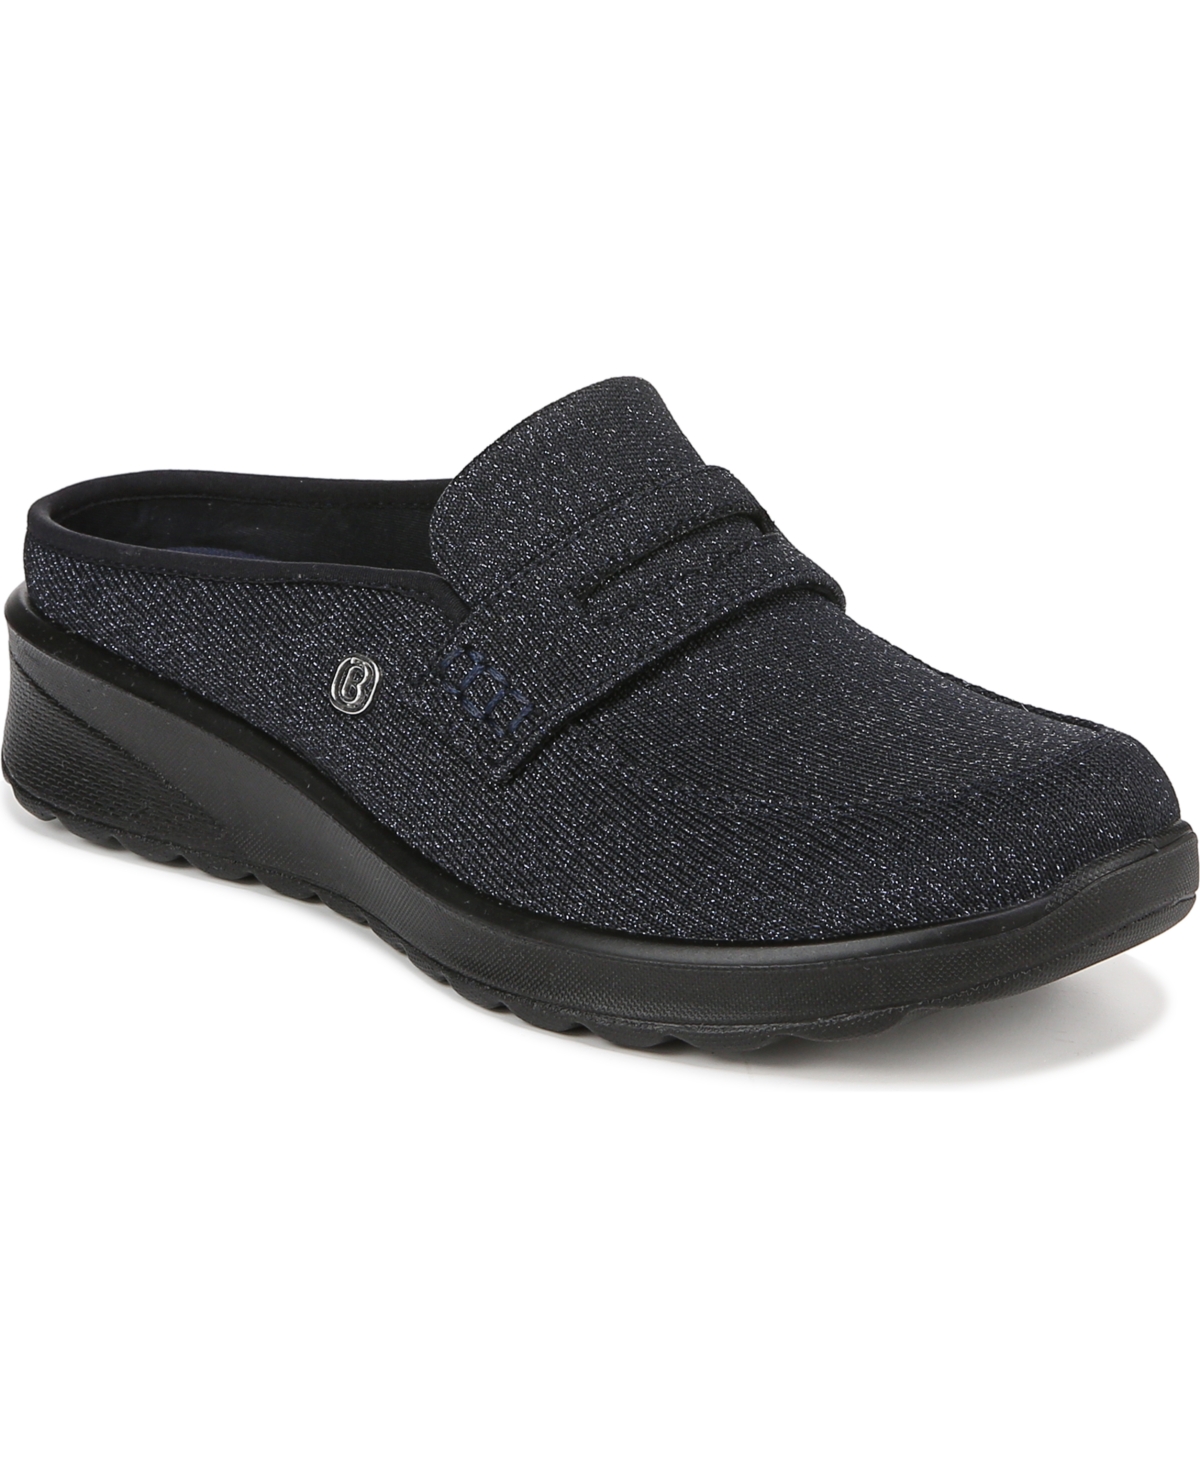 Georgia Washable Mules - Navy Spark Stretch Knit Fabric